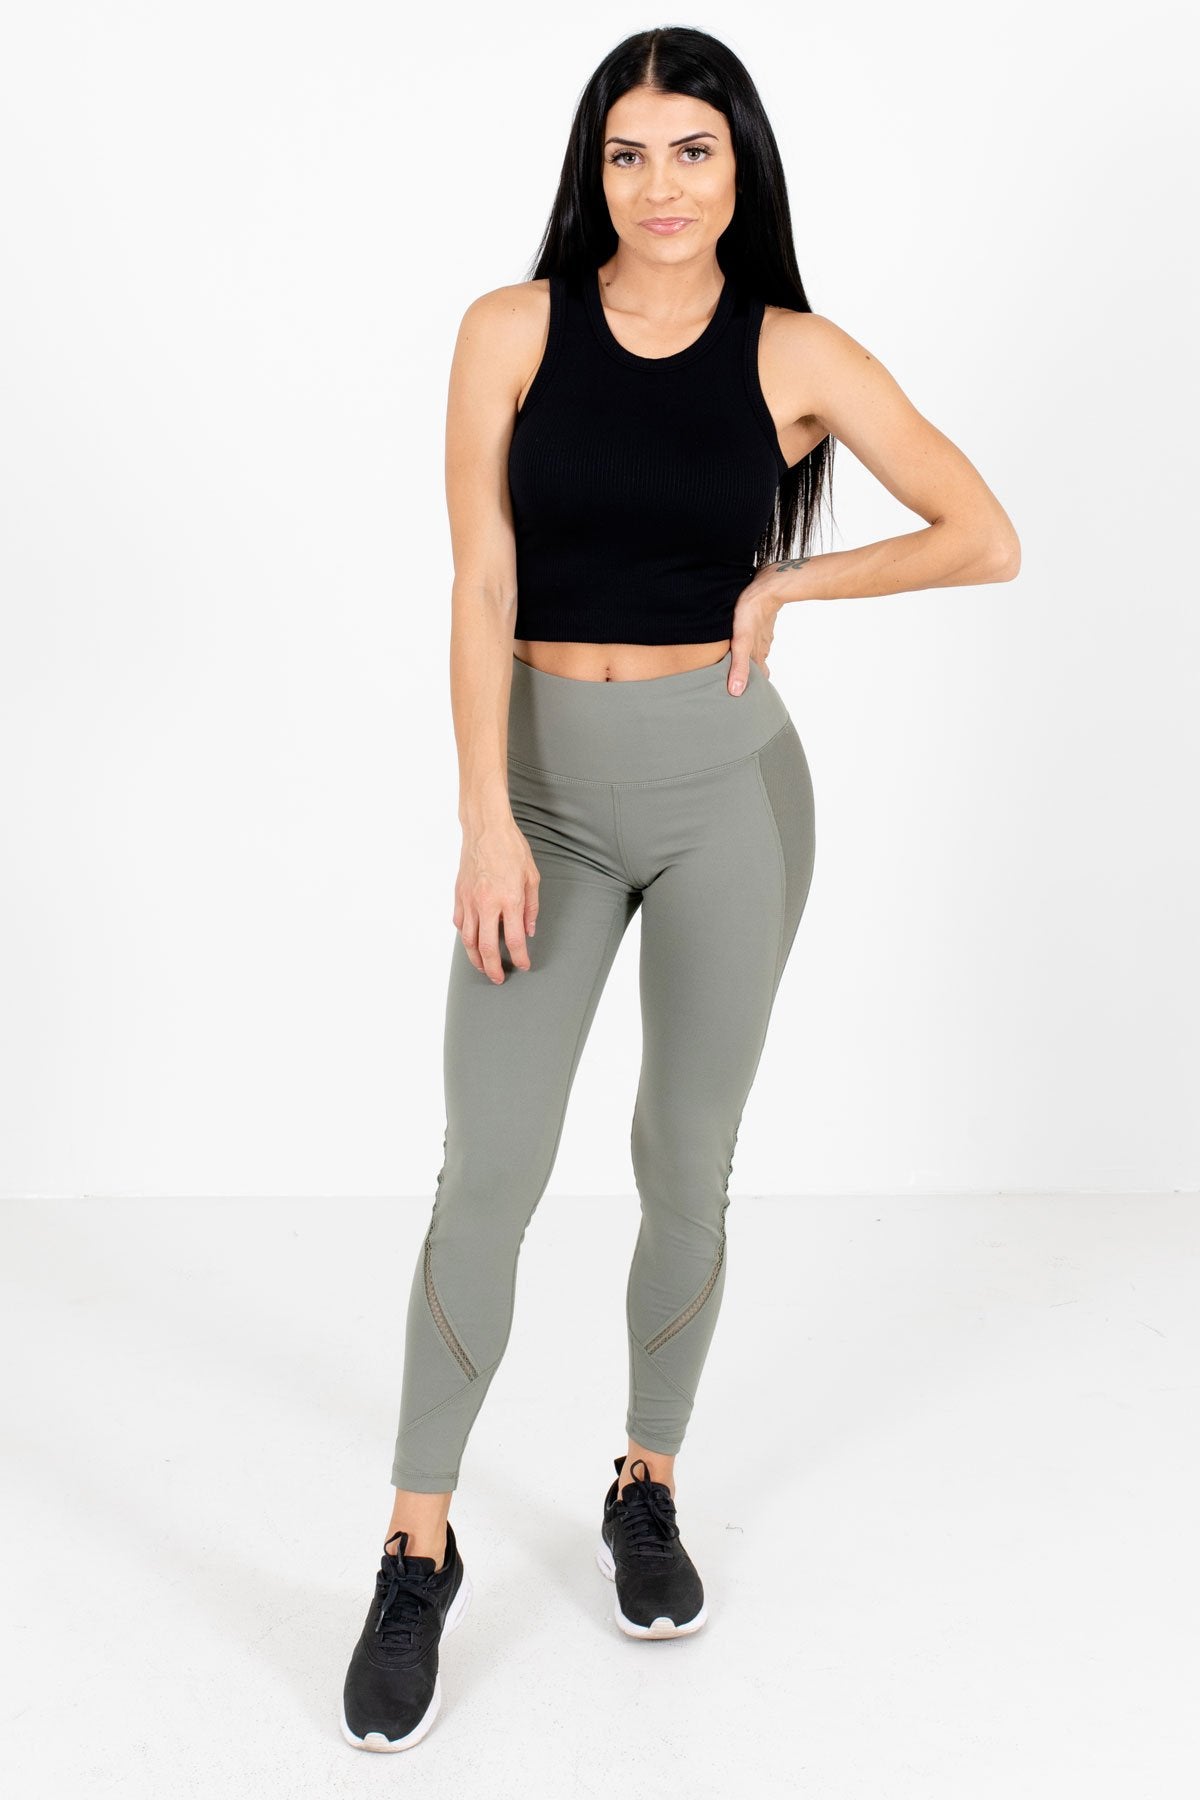 Olive Green Cute and Comfortable Boutique Active Leggings for Women 